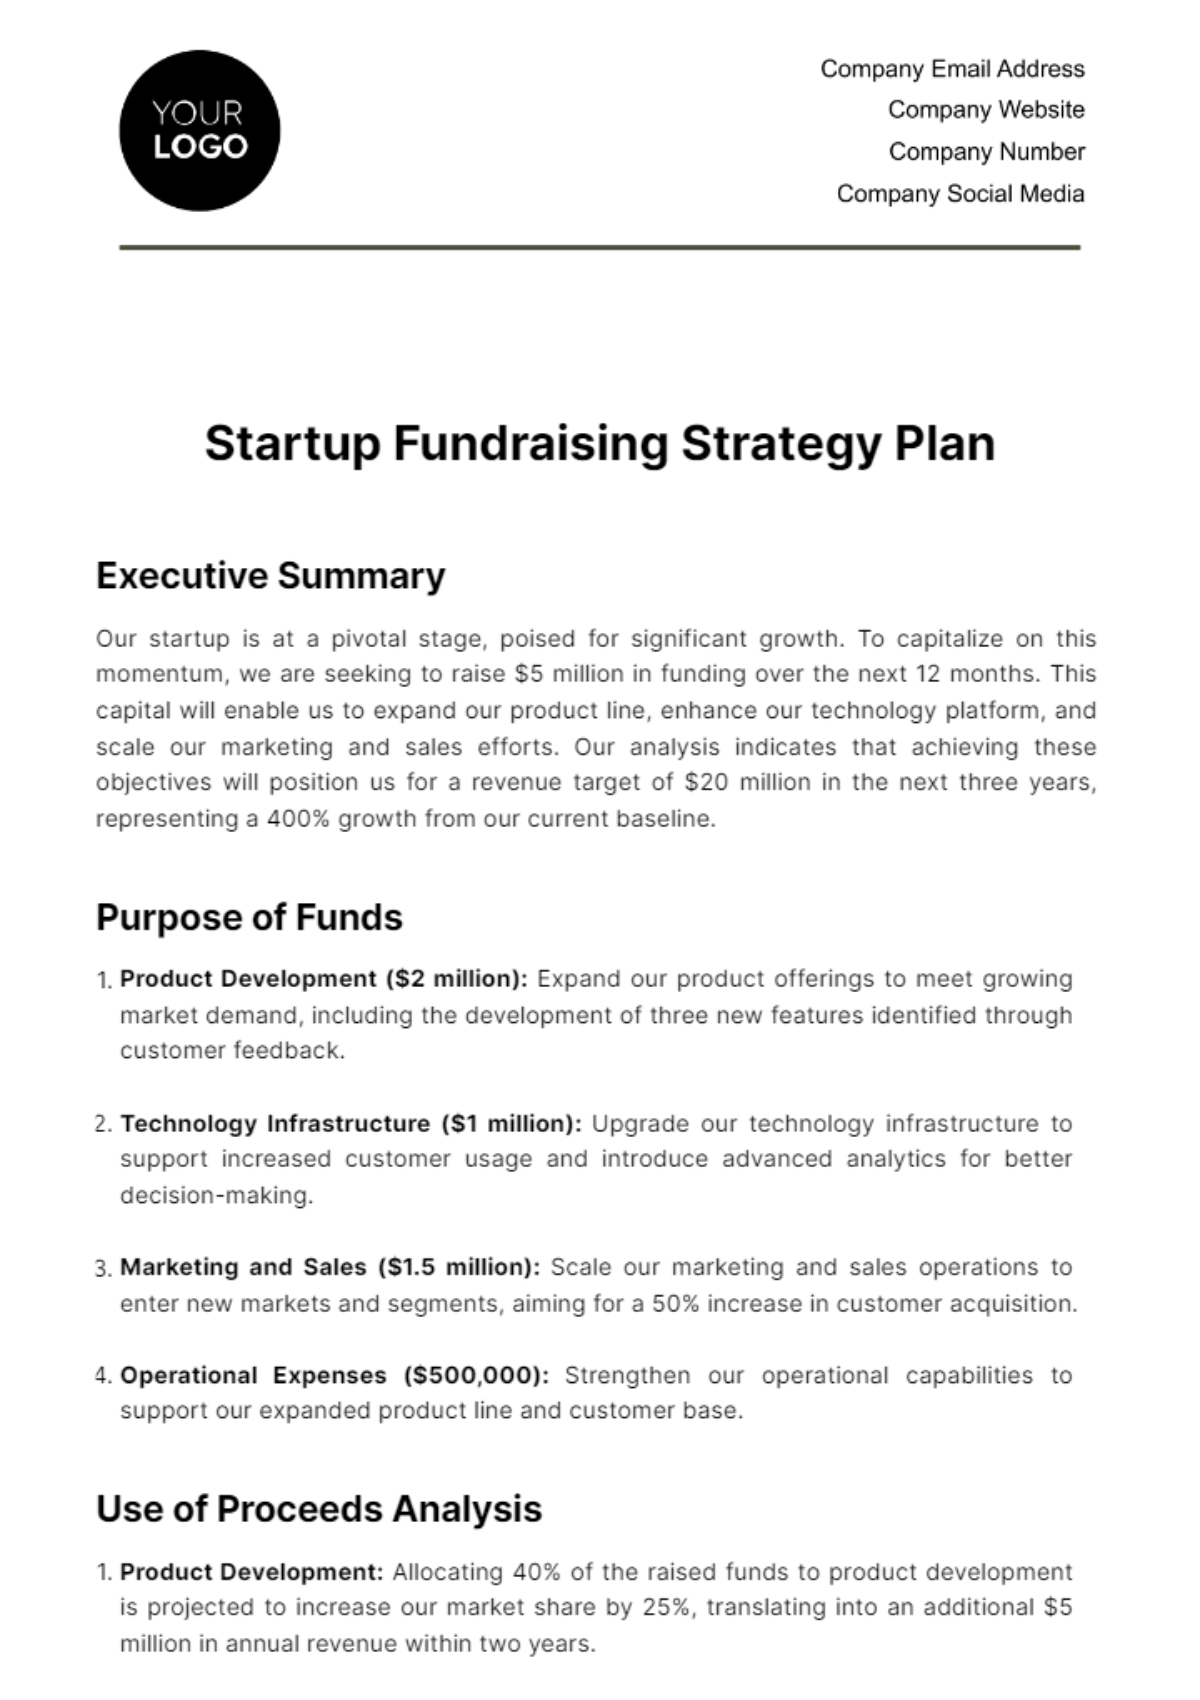 Free Startup Fundraising Strategy Plan Template